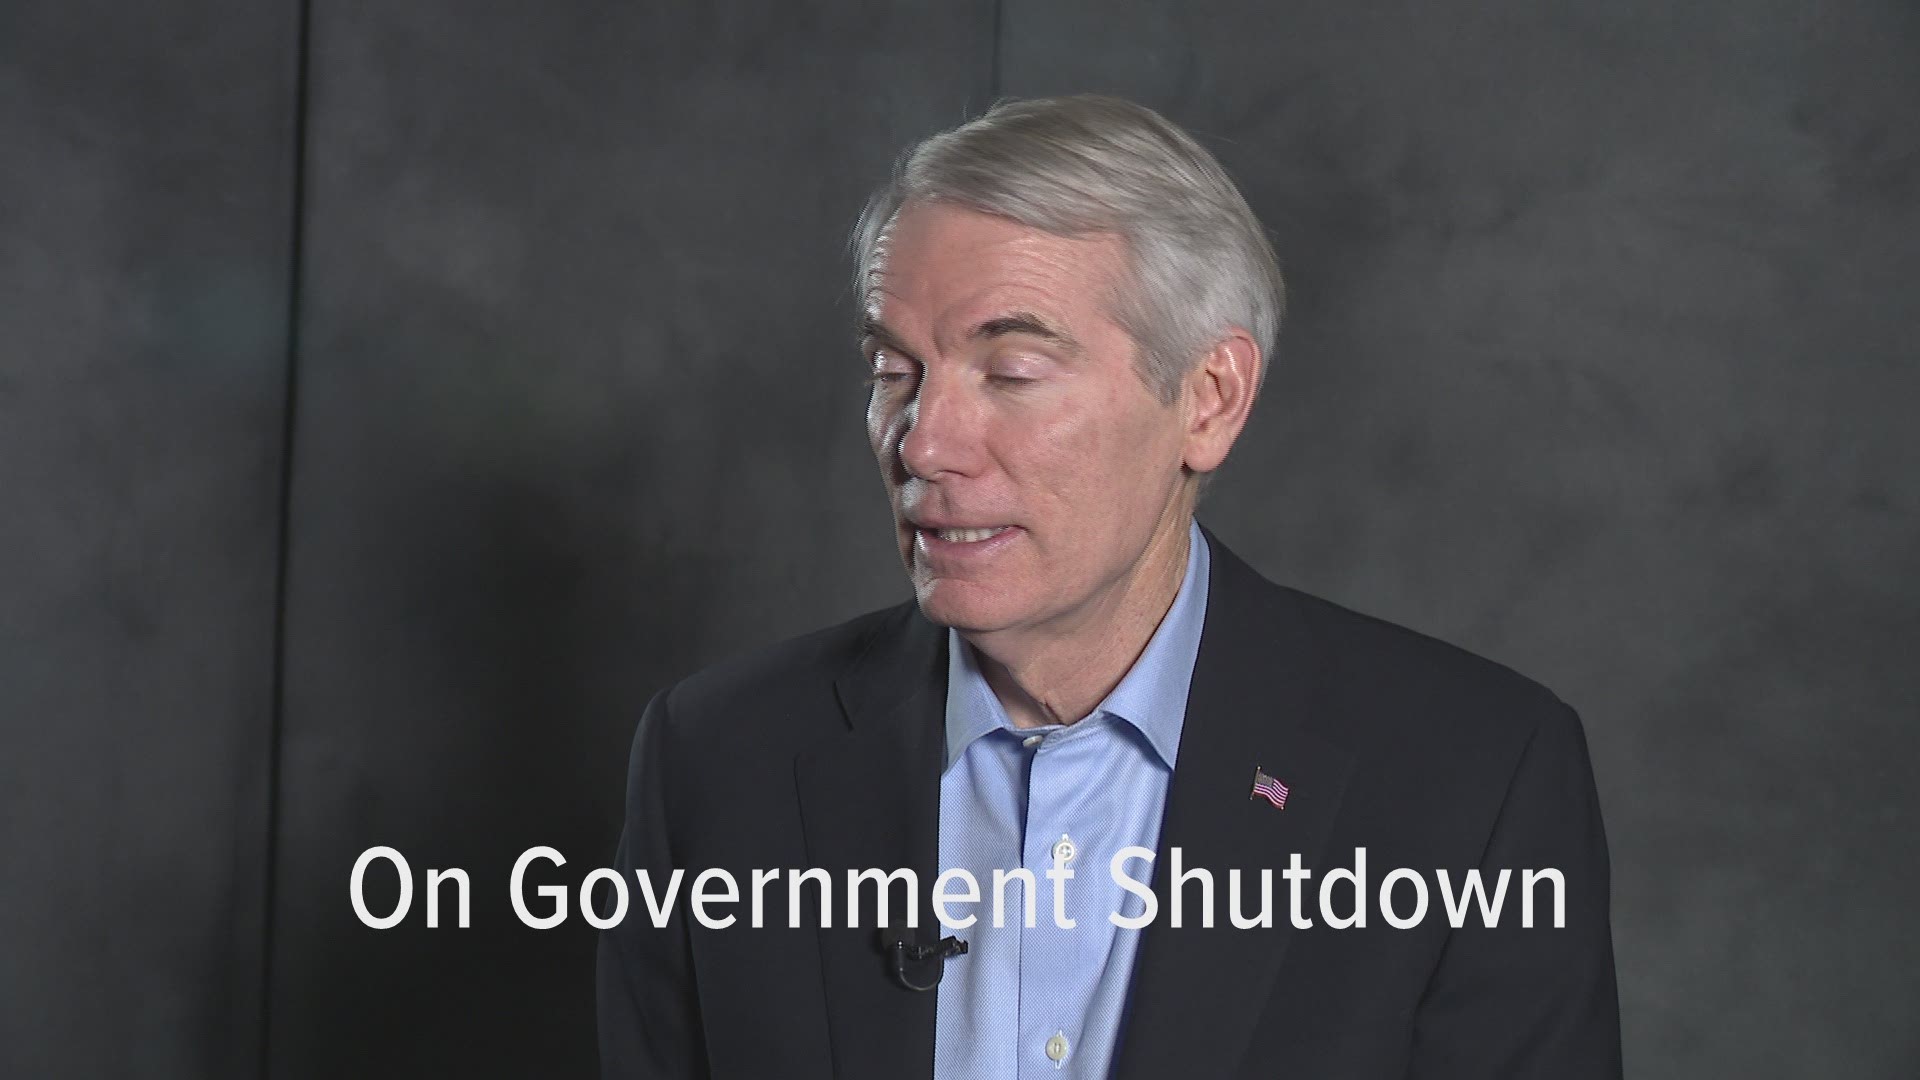 Sen. Rob Portman visited WKYC and discussed the ongoing government shutdown.